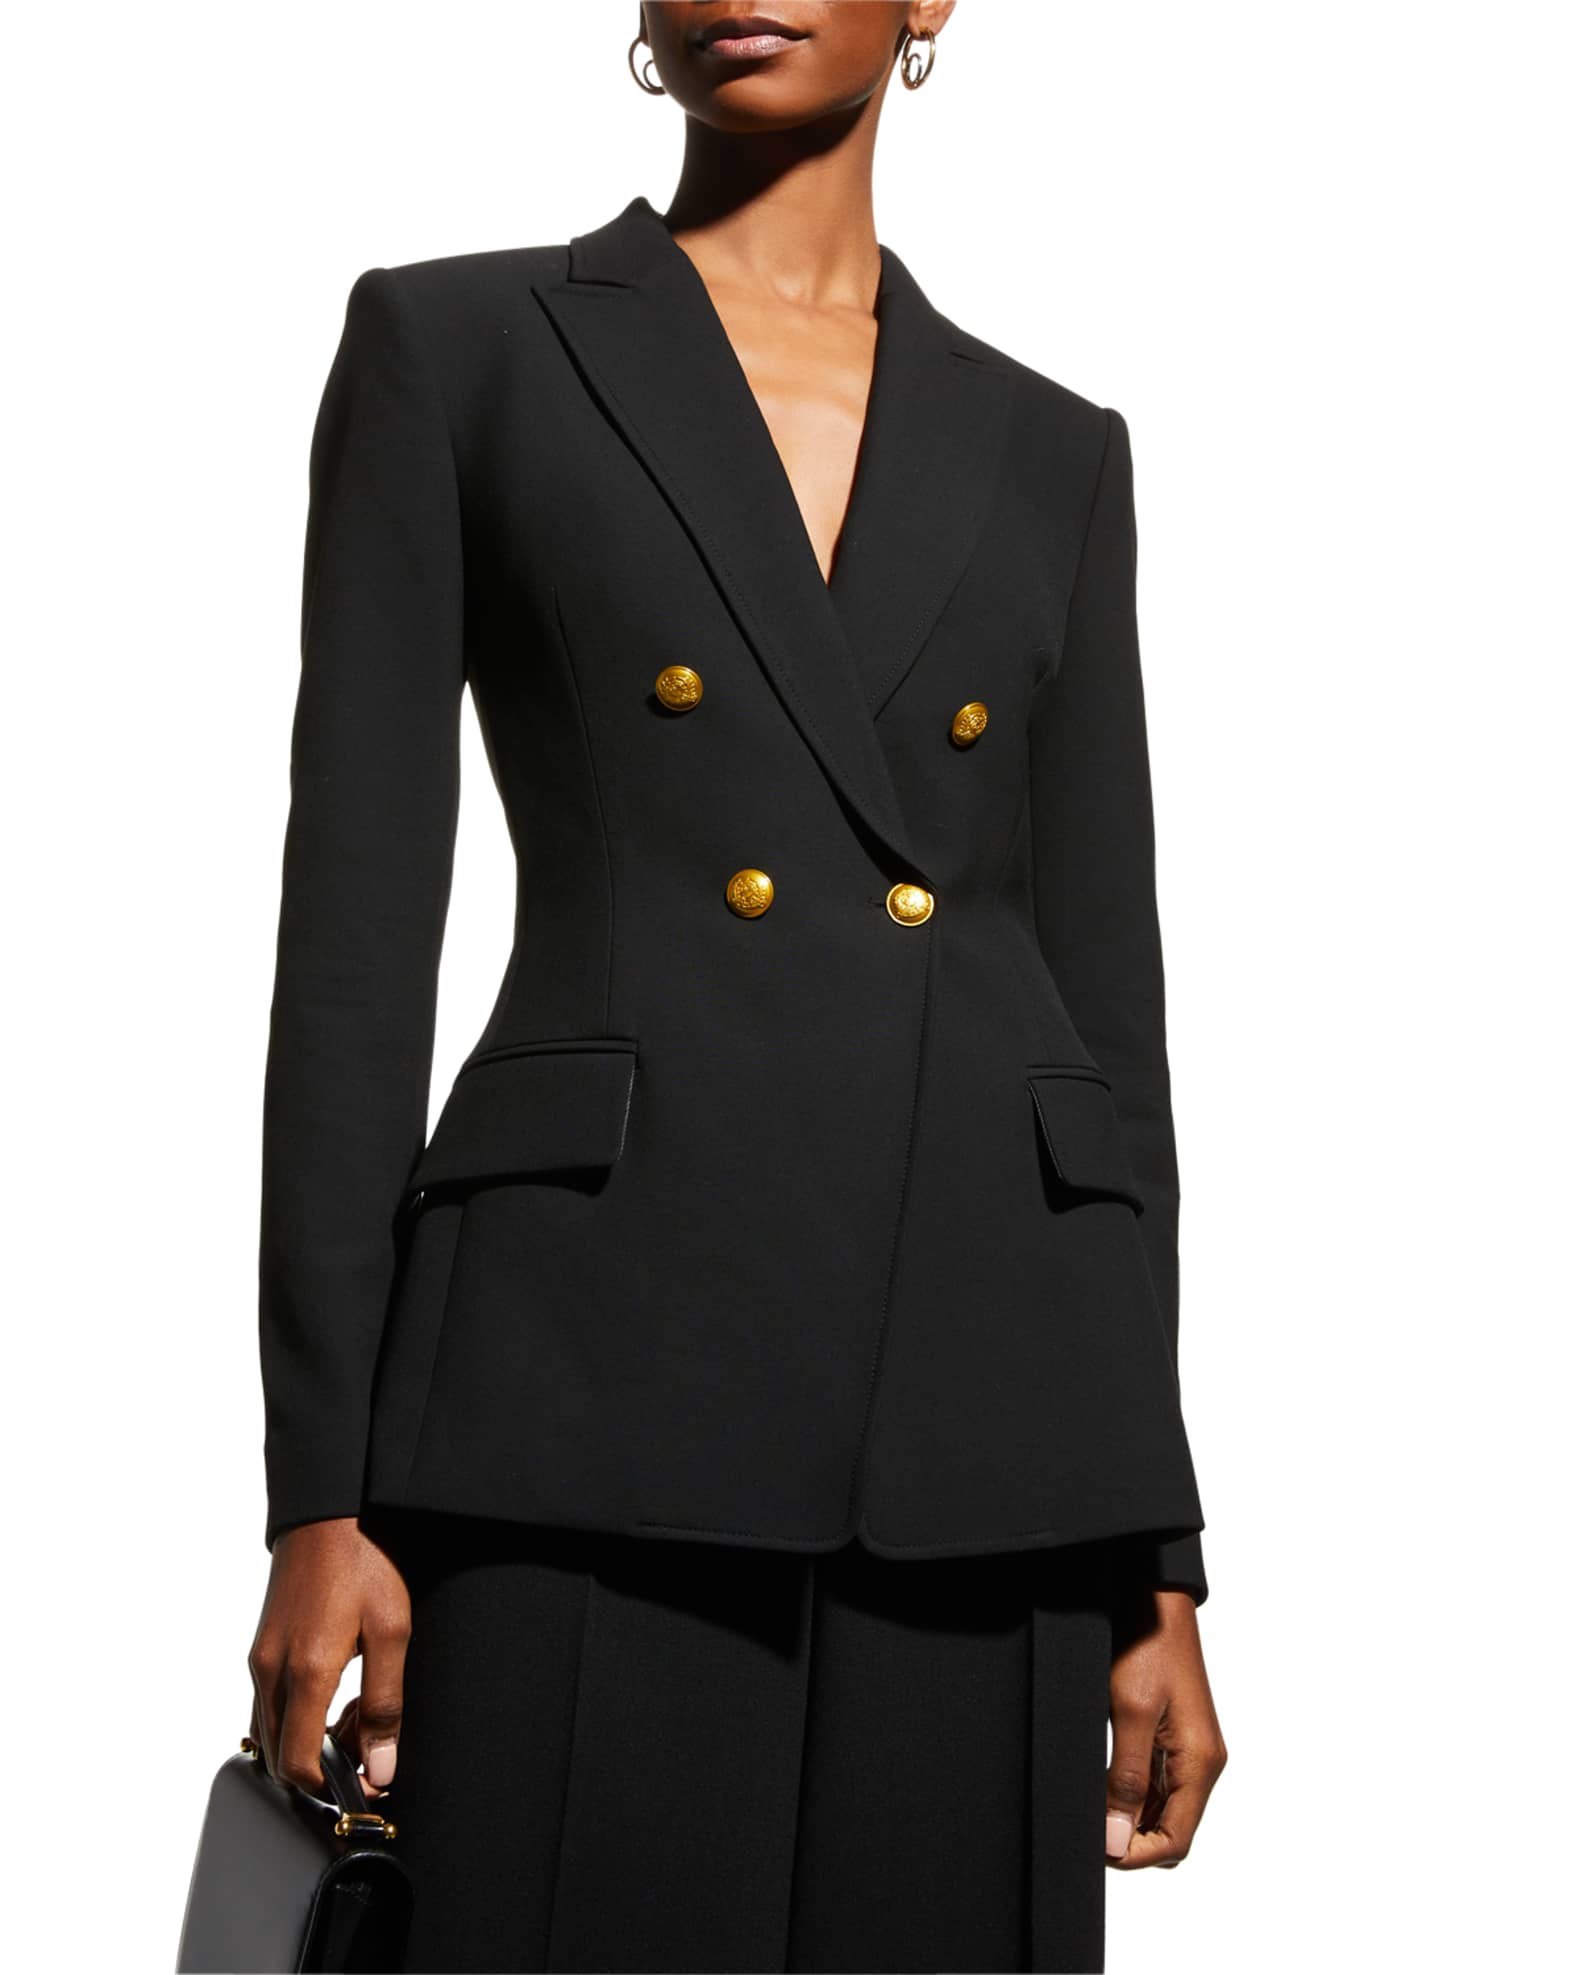 A.L.C. Sedgwick II Tailored Double-Breasted Jacket | Neiman Marcus